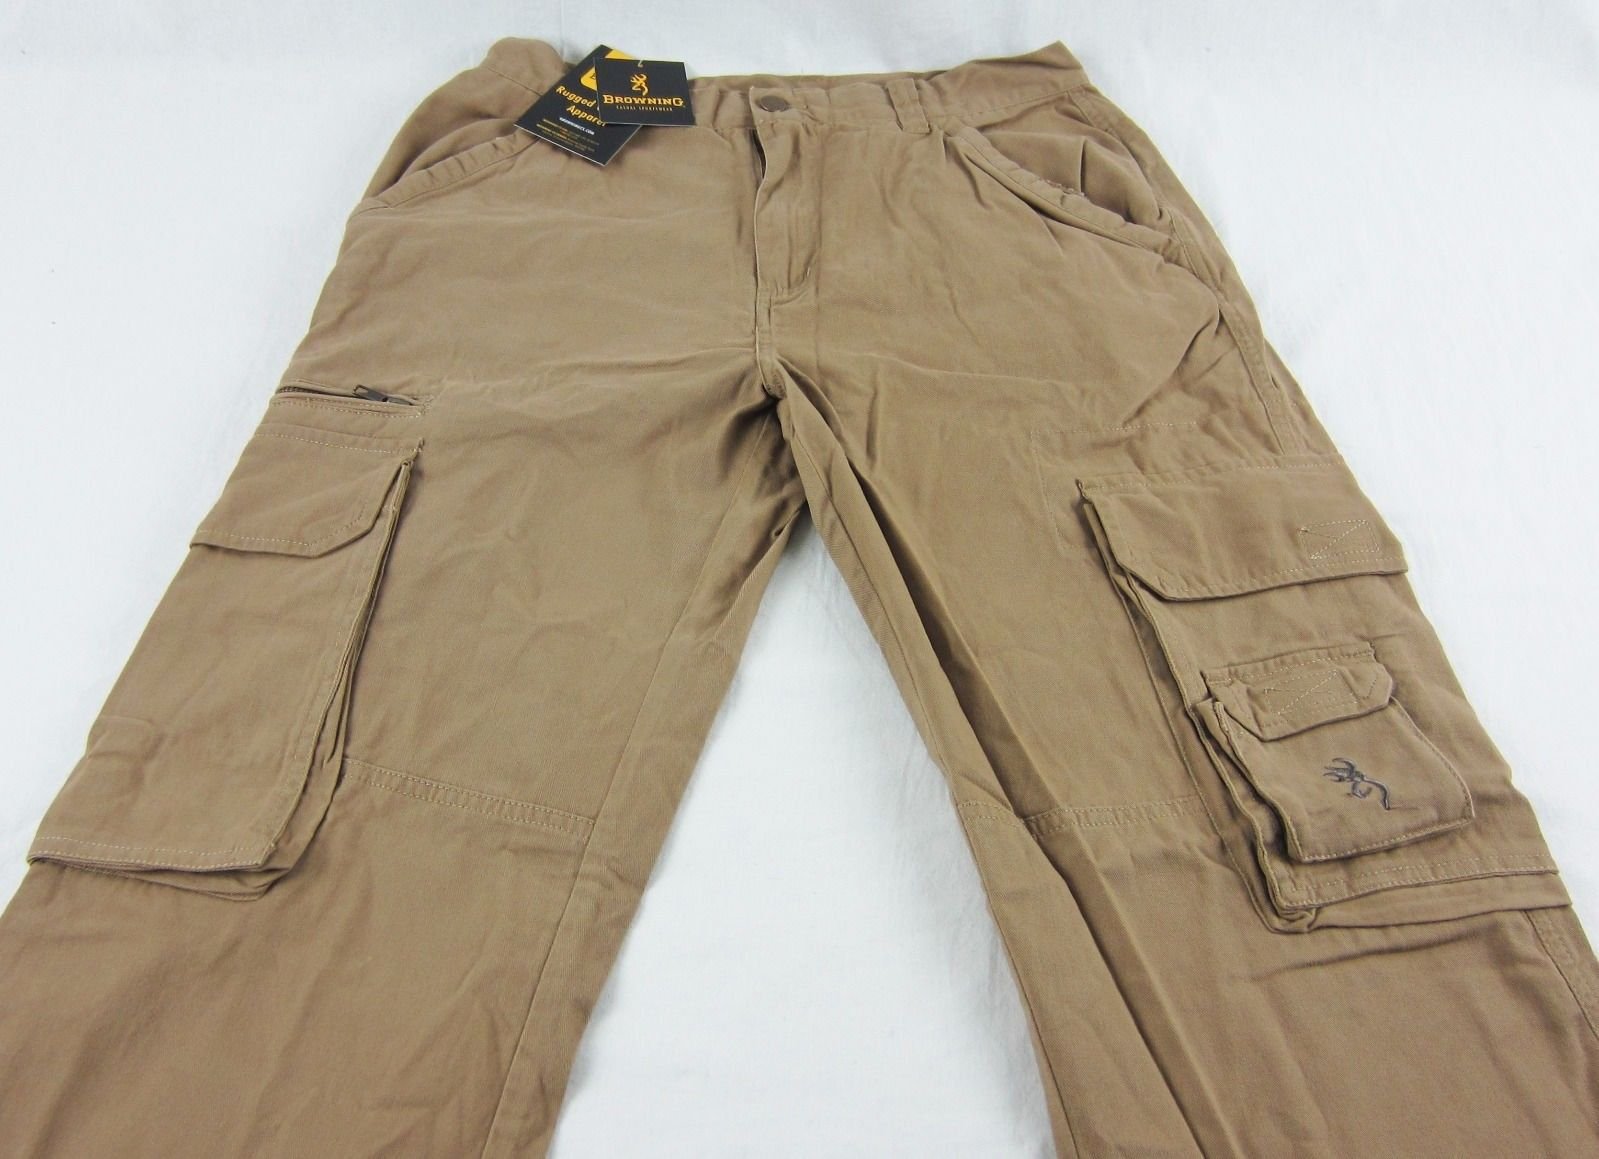 Mens NWT Browning Cotton Twill Pants Khaki Cargo Rugged Outdoor 36x30 ...